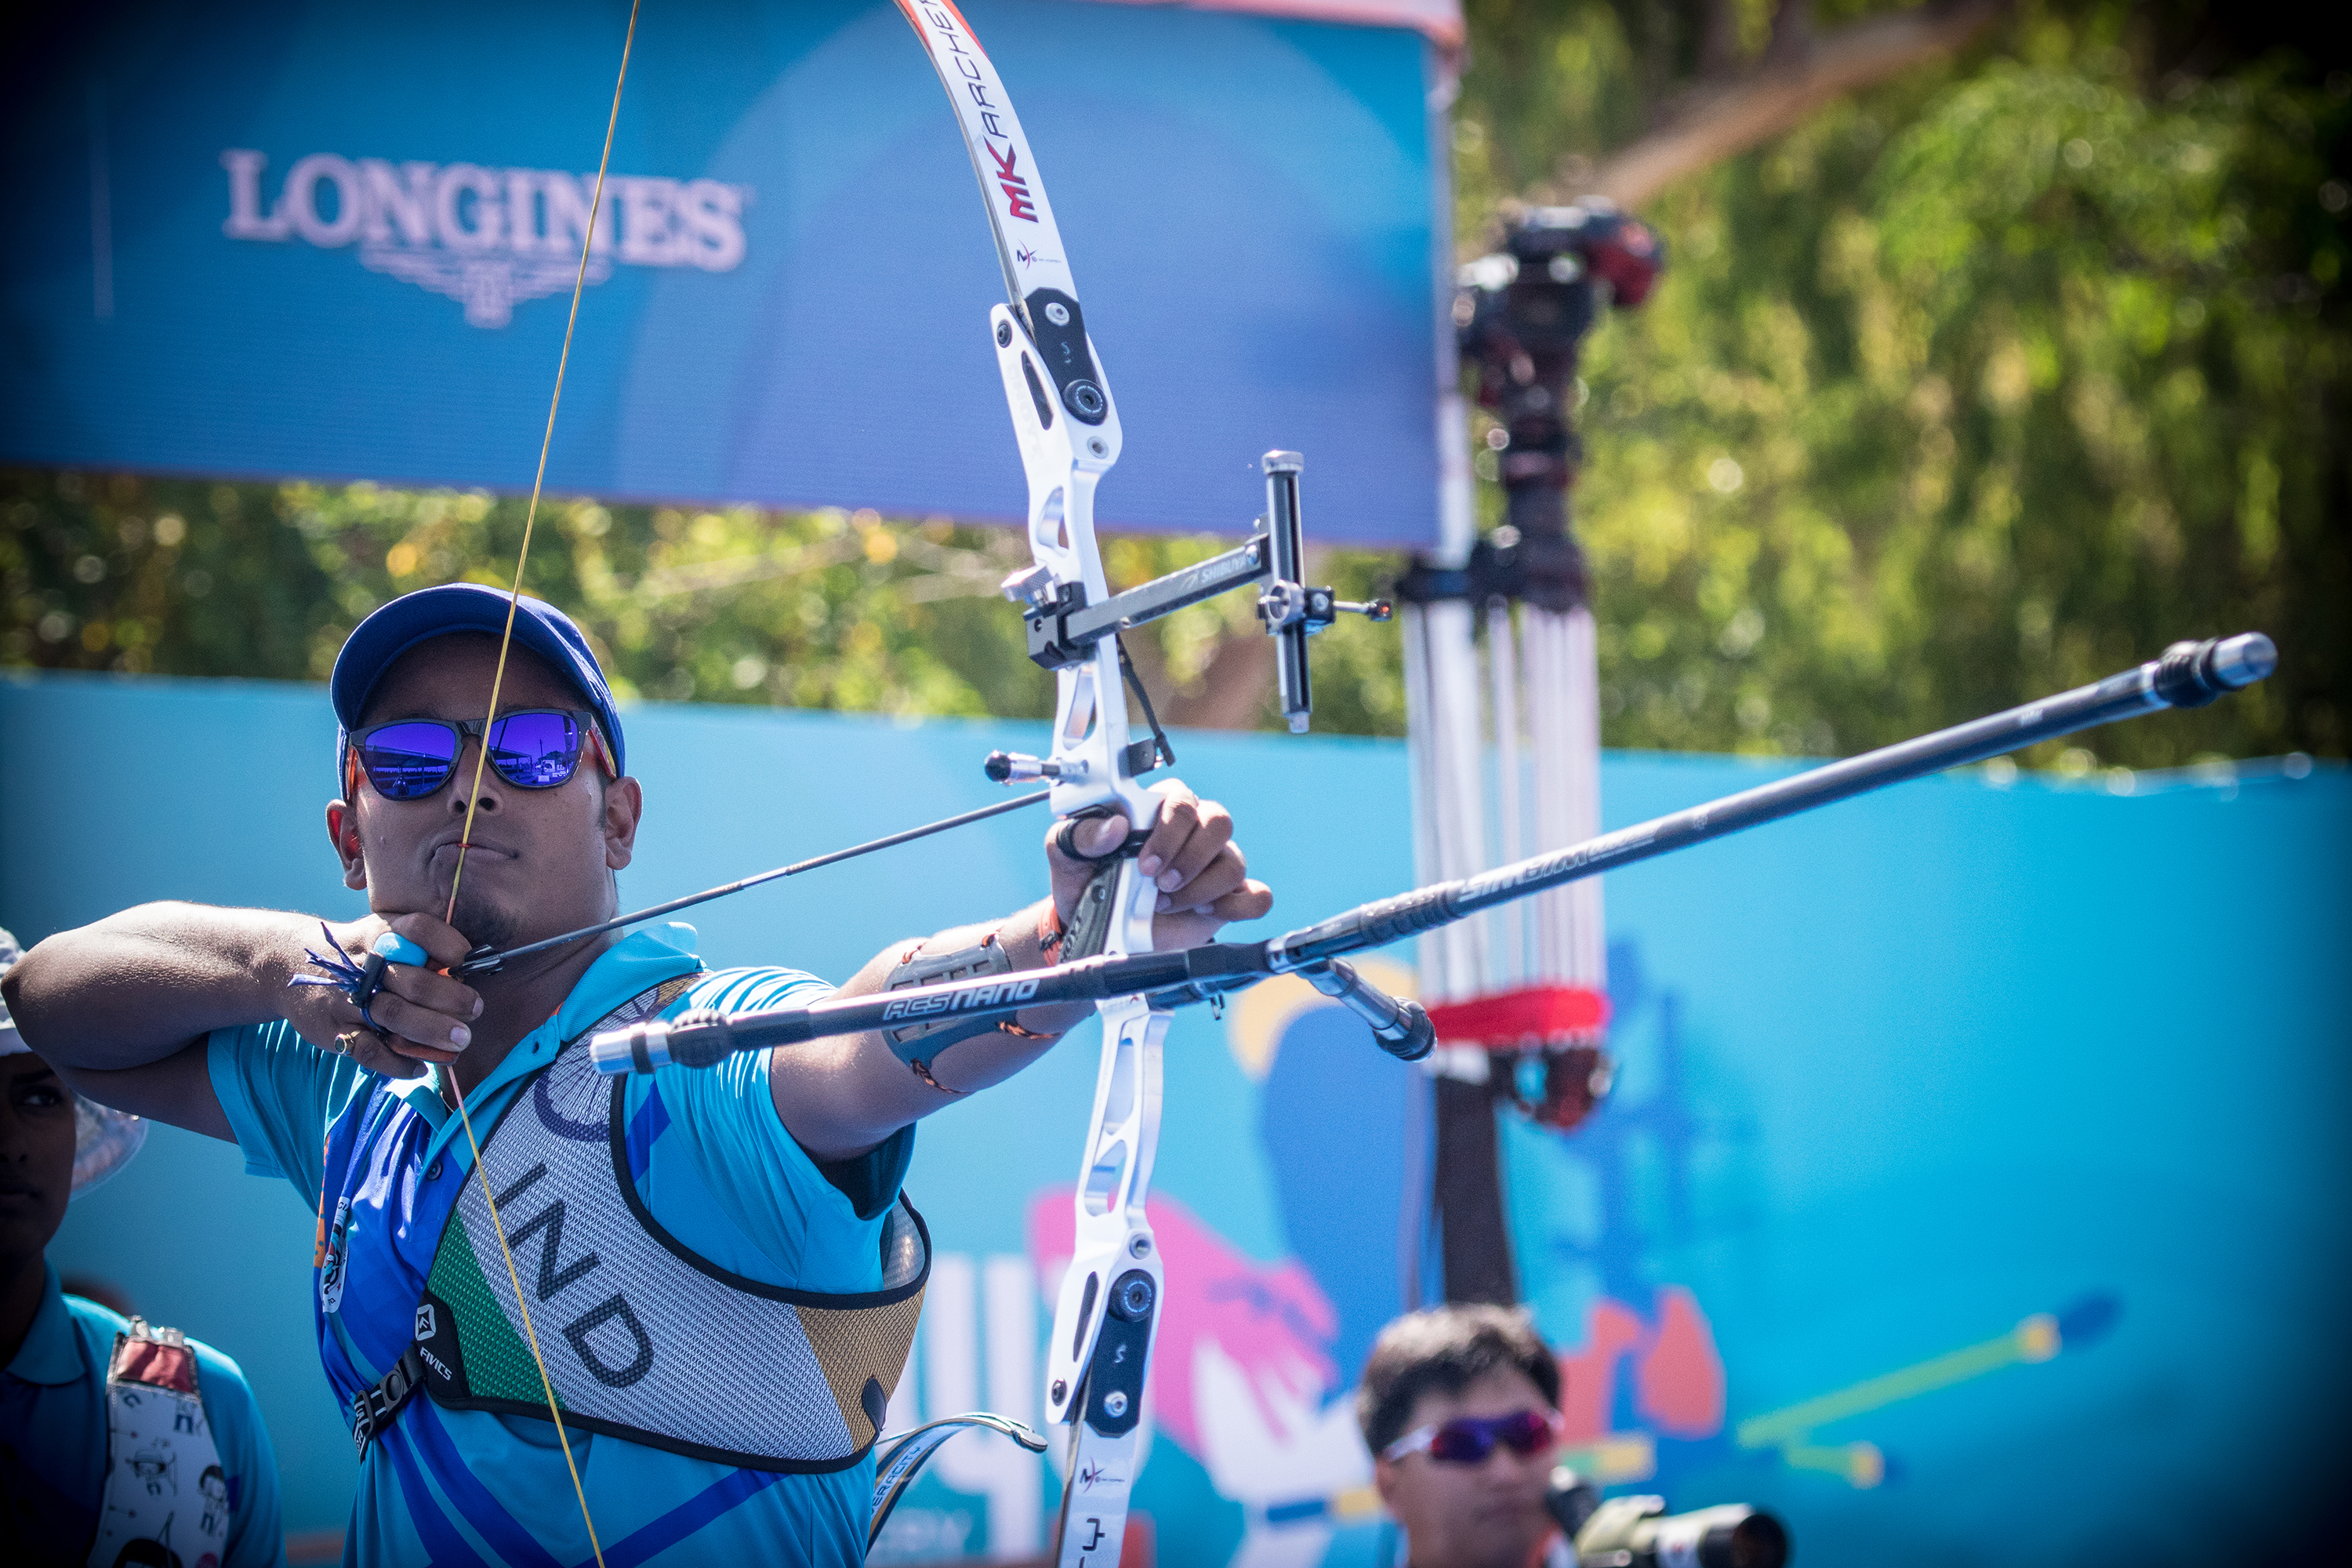 Indian Archery team on mission to remove their 'chokers' tag at the Olympics